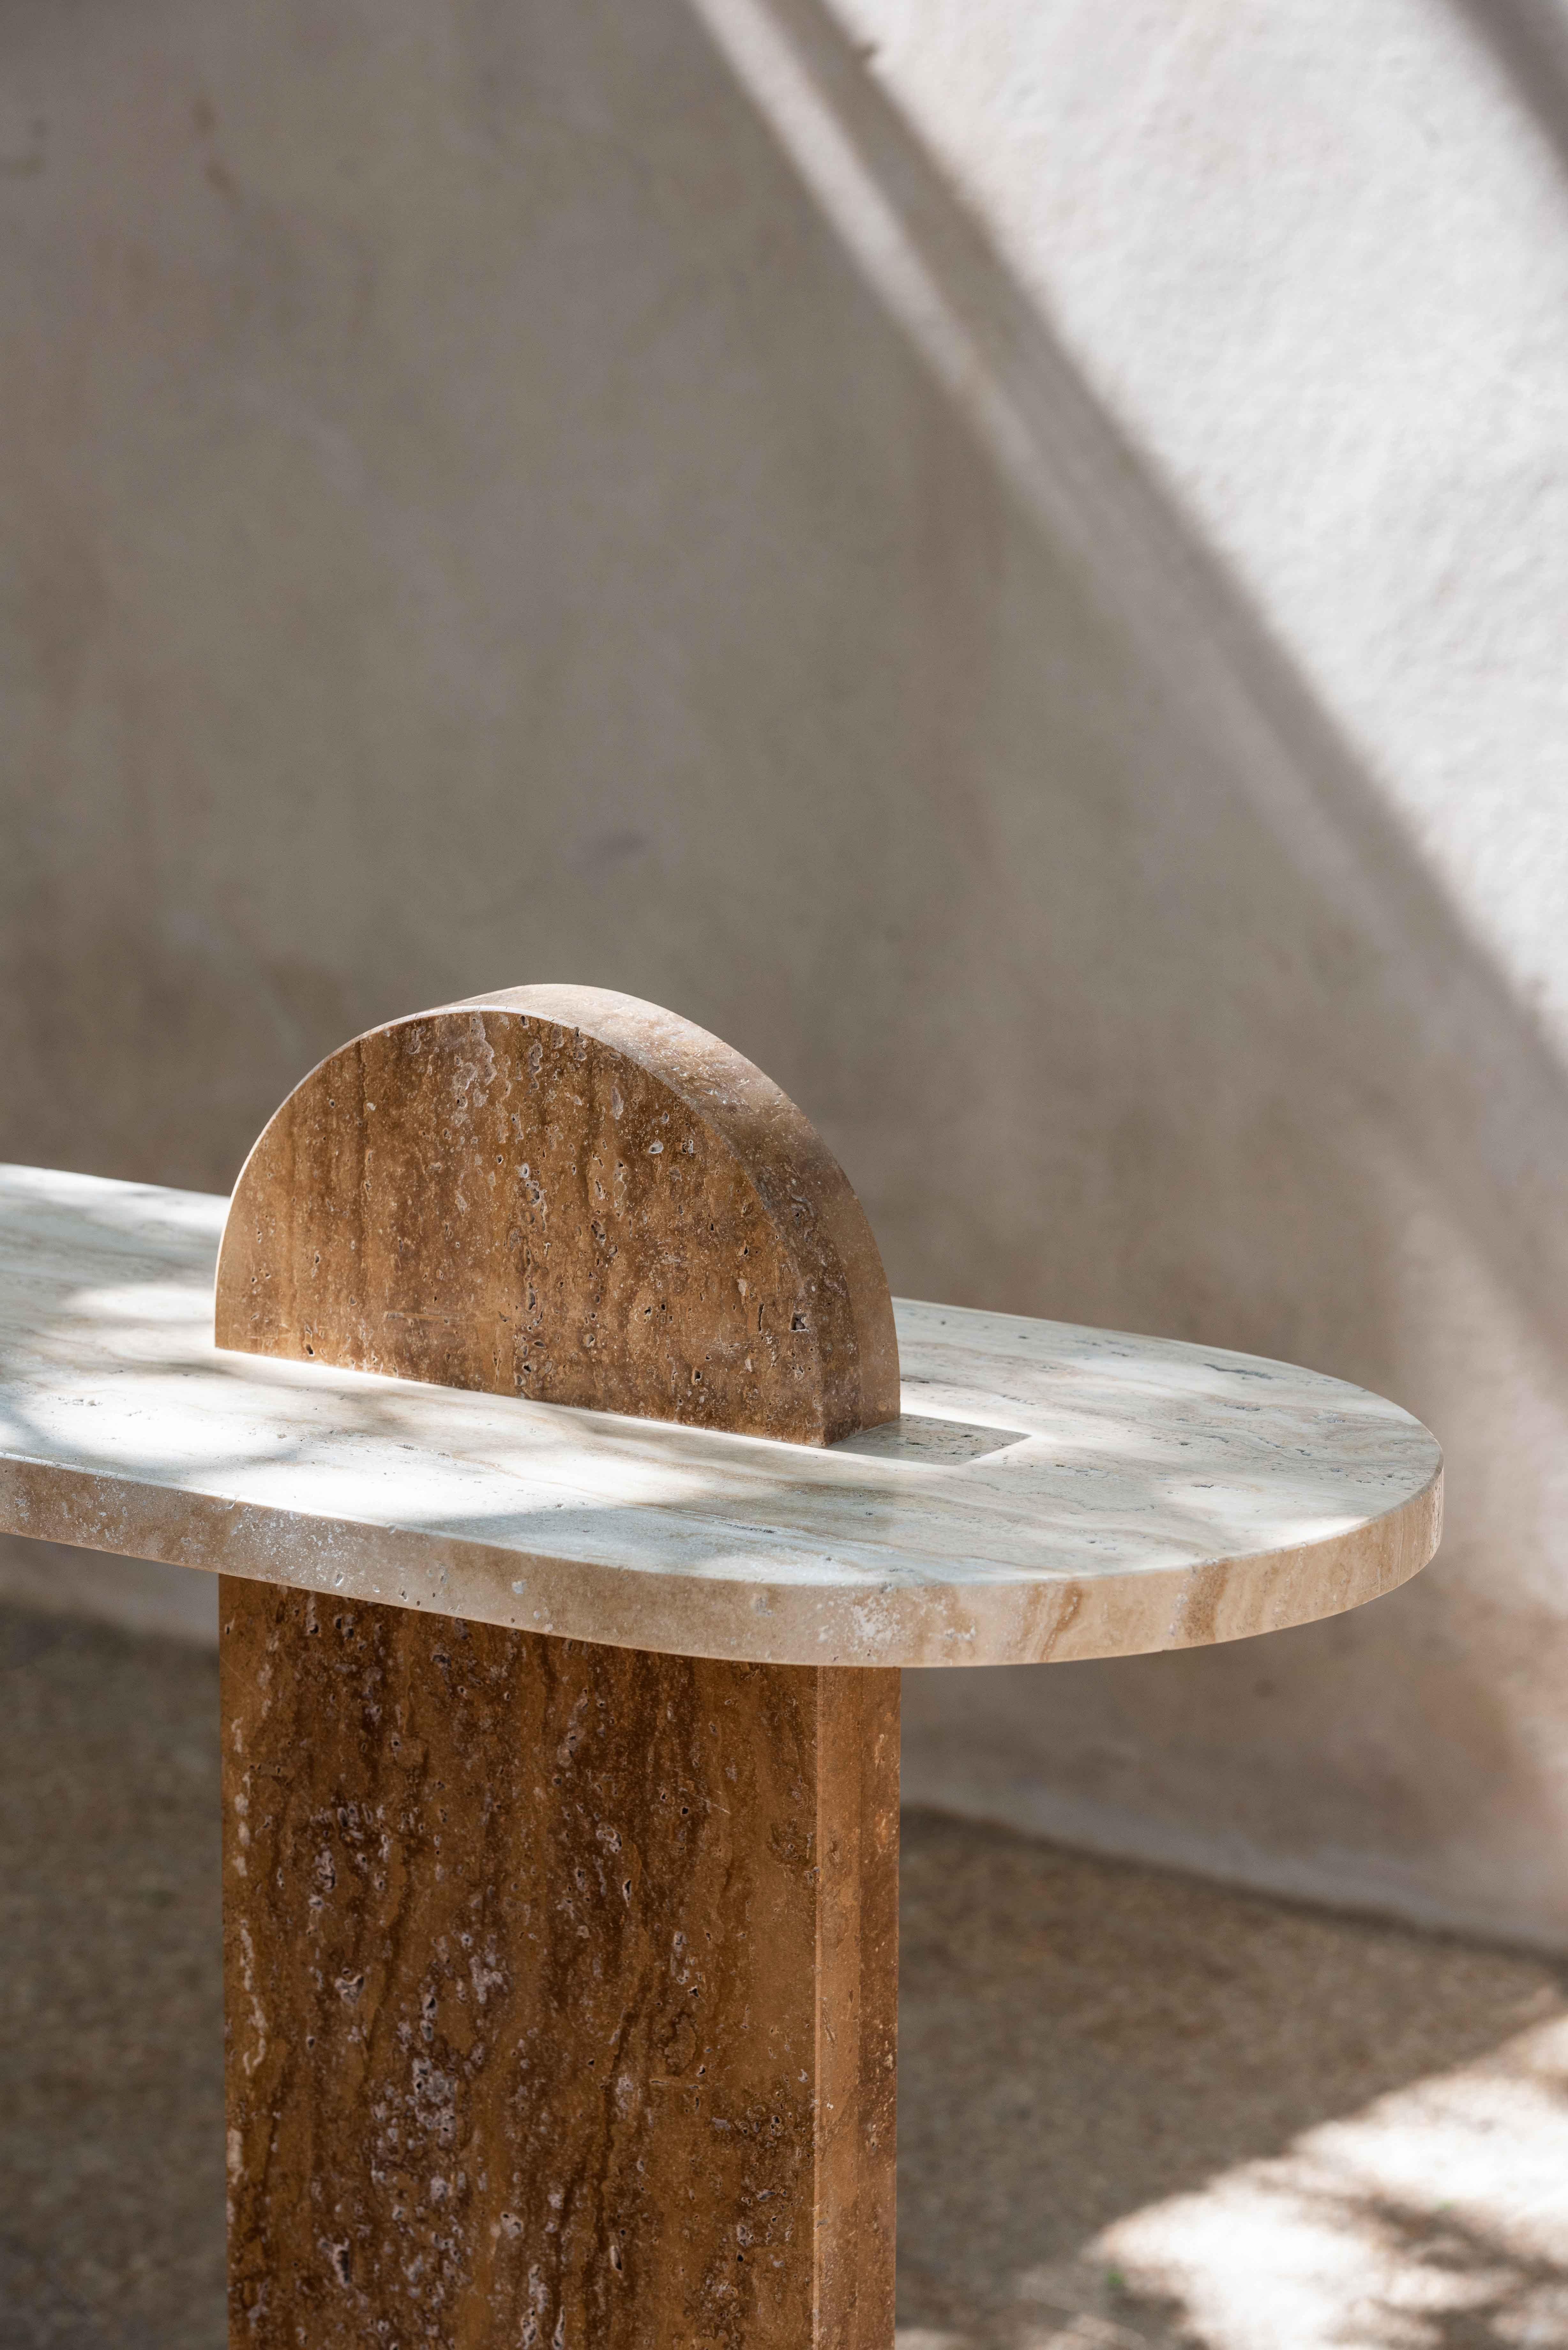 Gol. 002 marble table by Chapter Studio
Dimensions: H 86 x W 40 x D 160
Material: marble (beige travertine, rosa levanto)

Effortless composition and eccentric design bring forth the Golestan Series. Evoking rich emotions of heritage and culture